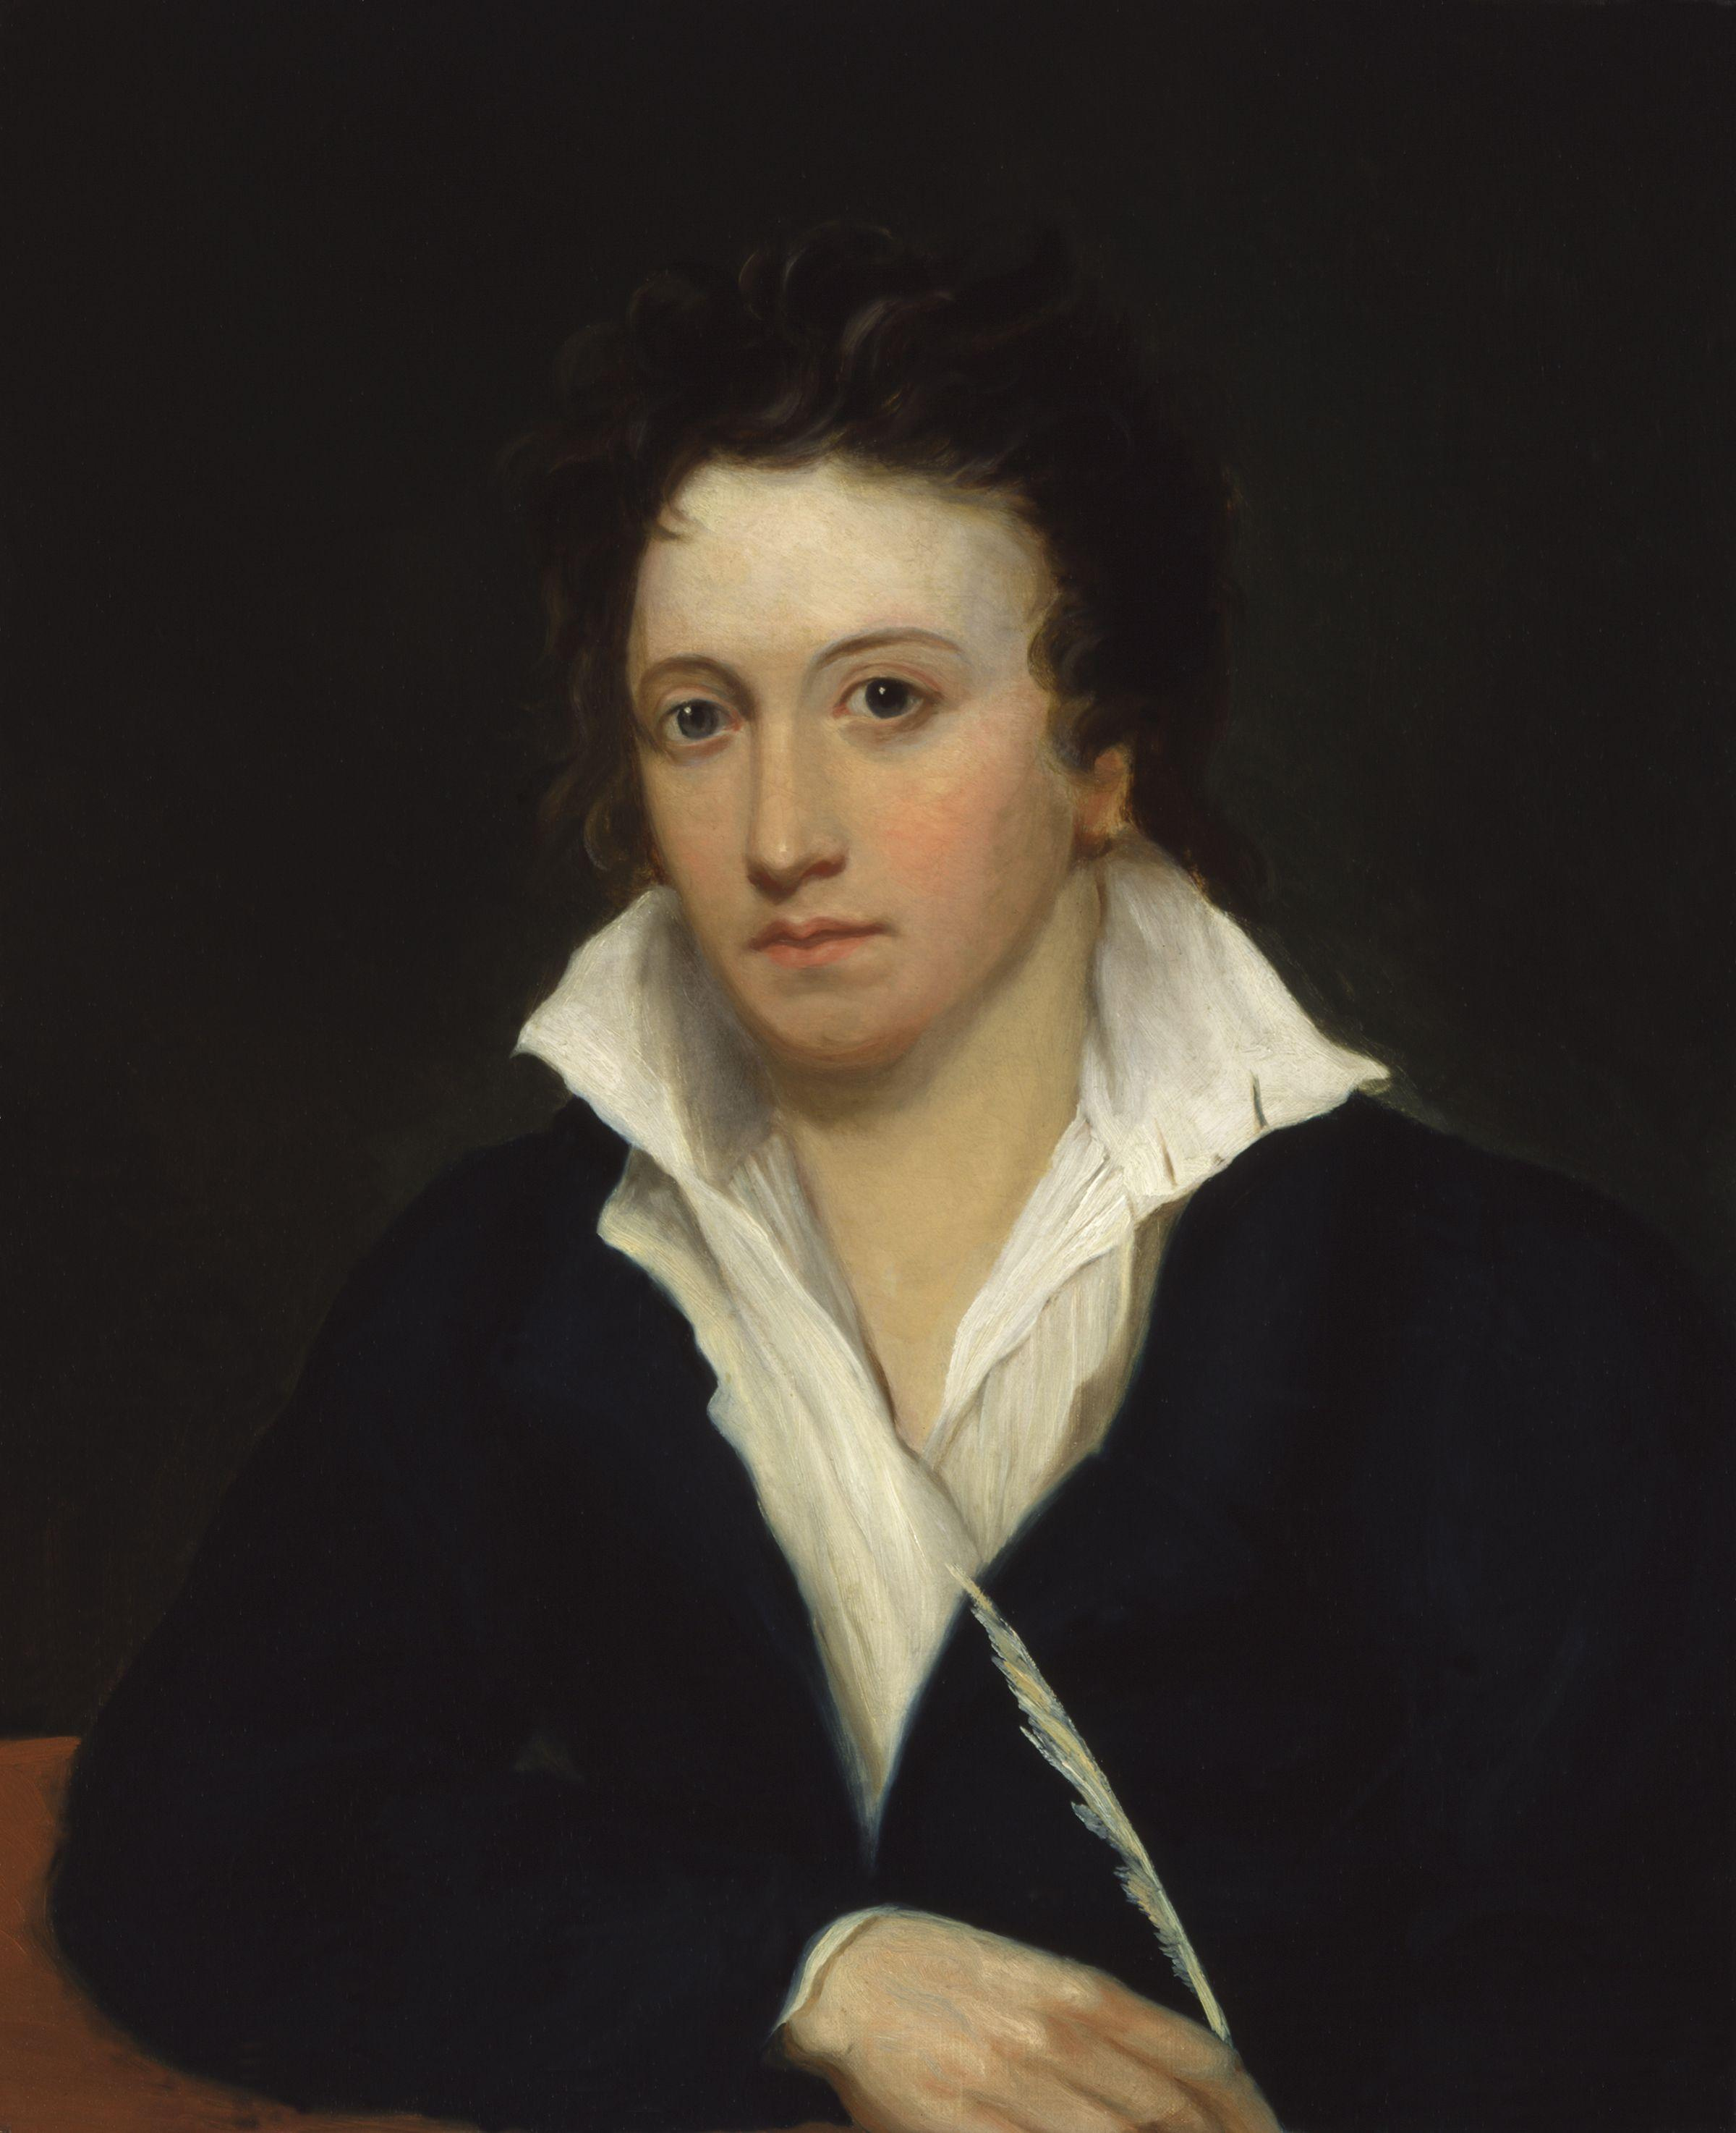 Percy Bysshe Shelley Image public domain